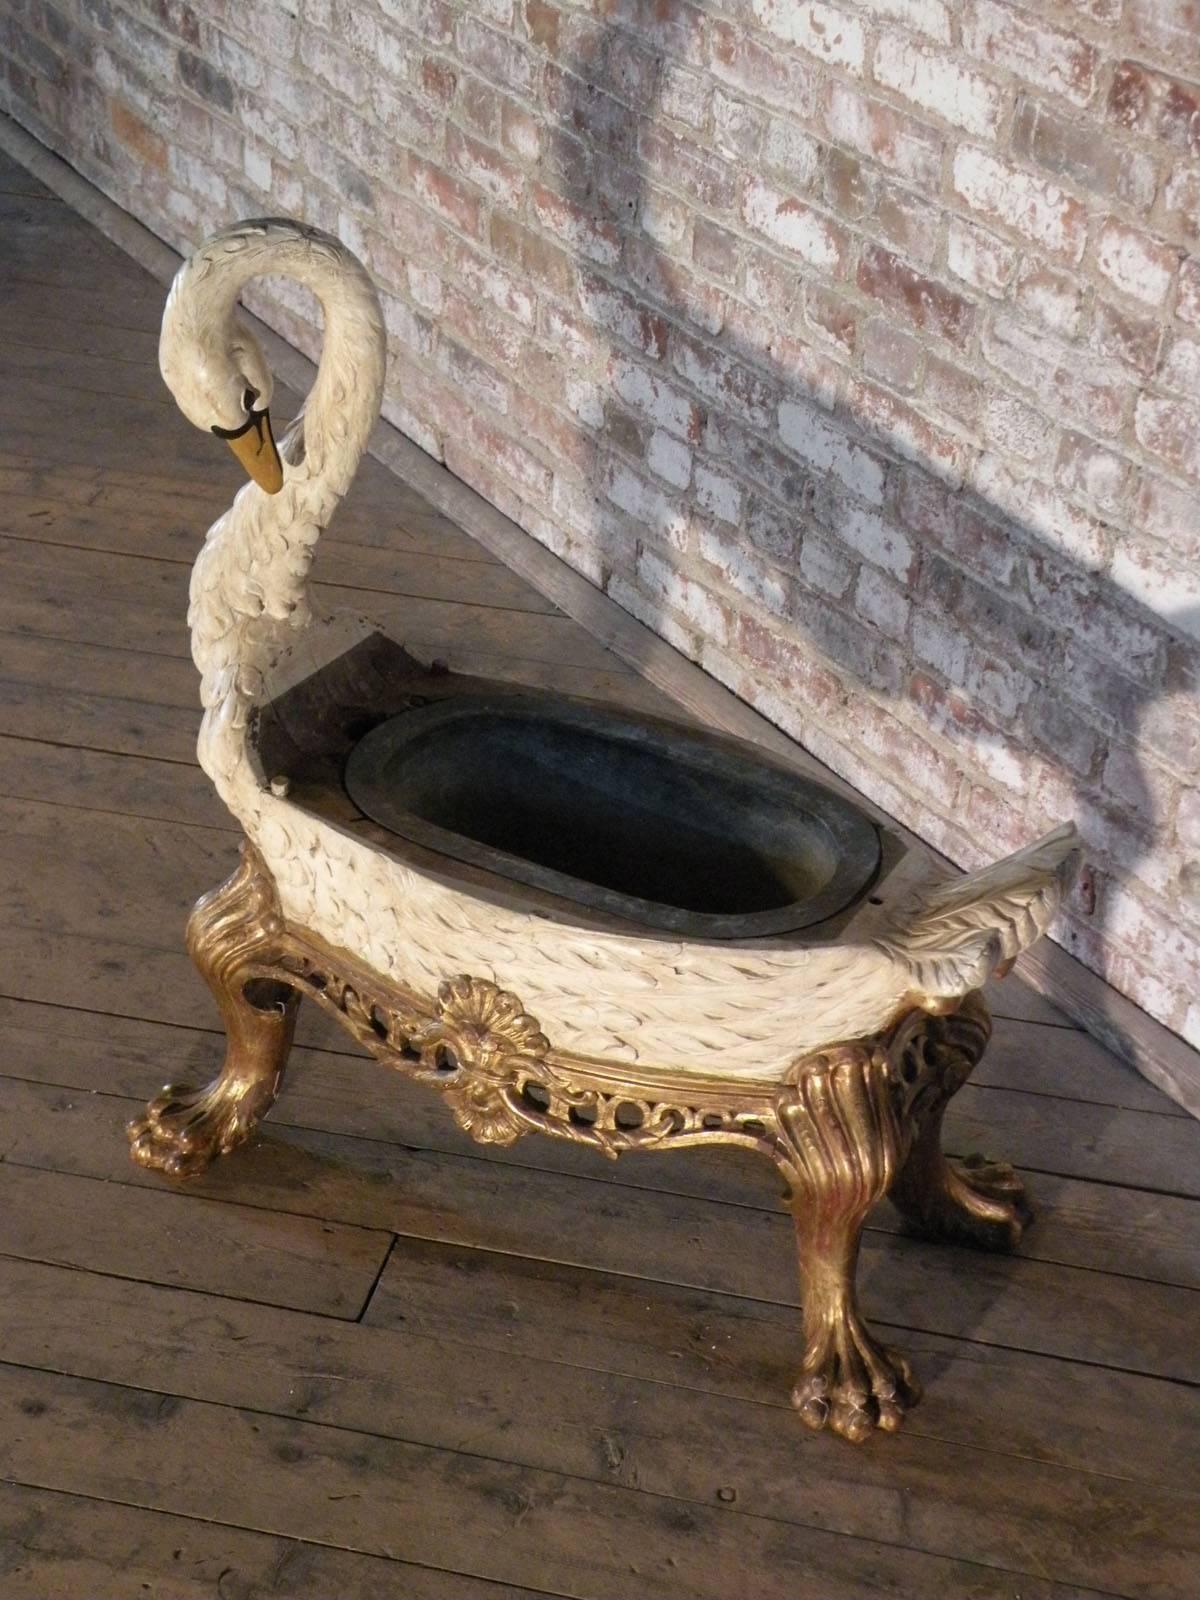 18th Century Rococo German Painted and Gilt Wine Cooler in the Form of a Swan  In Good Condition For Sale In Troy, NY